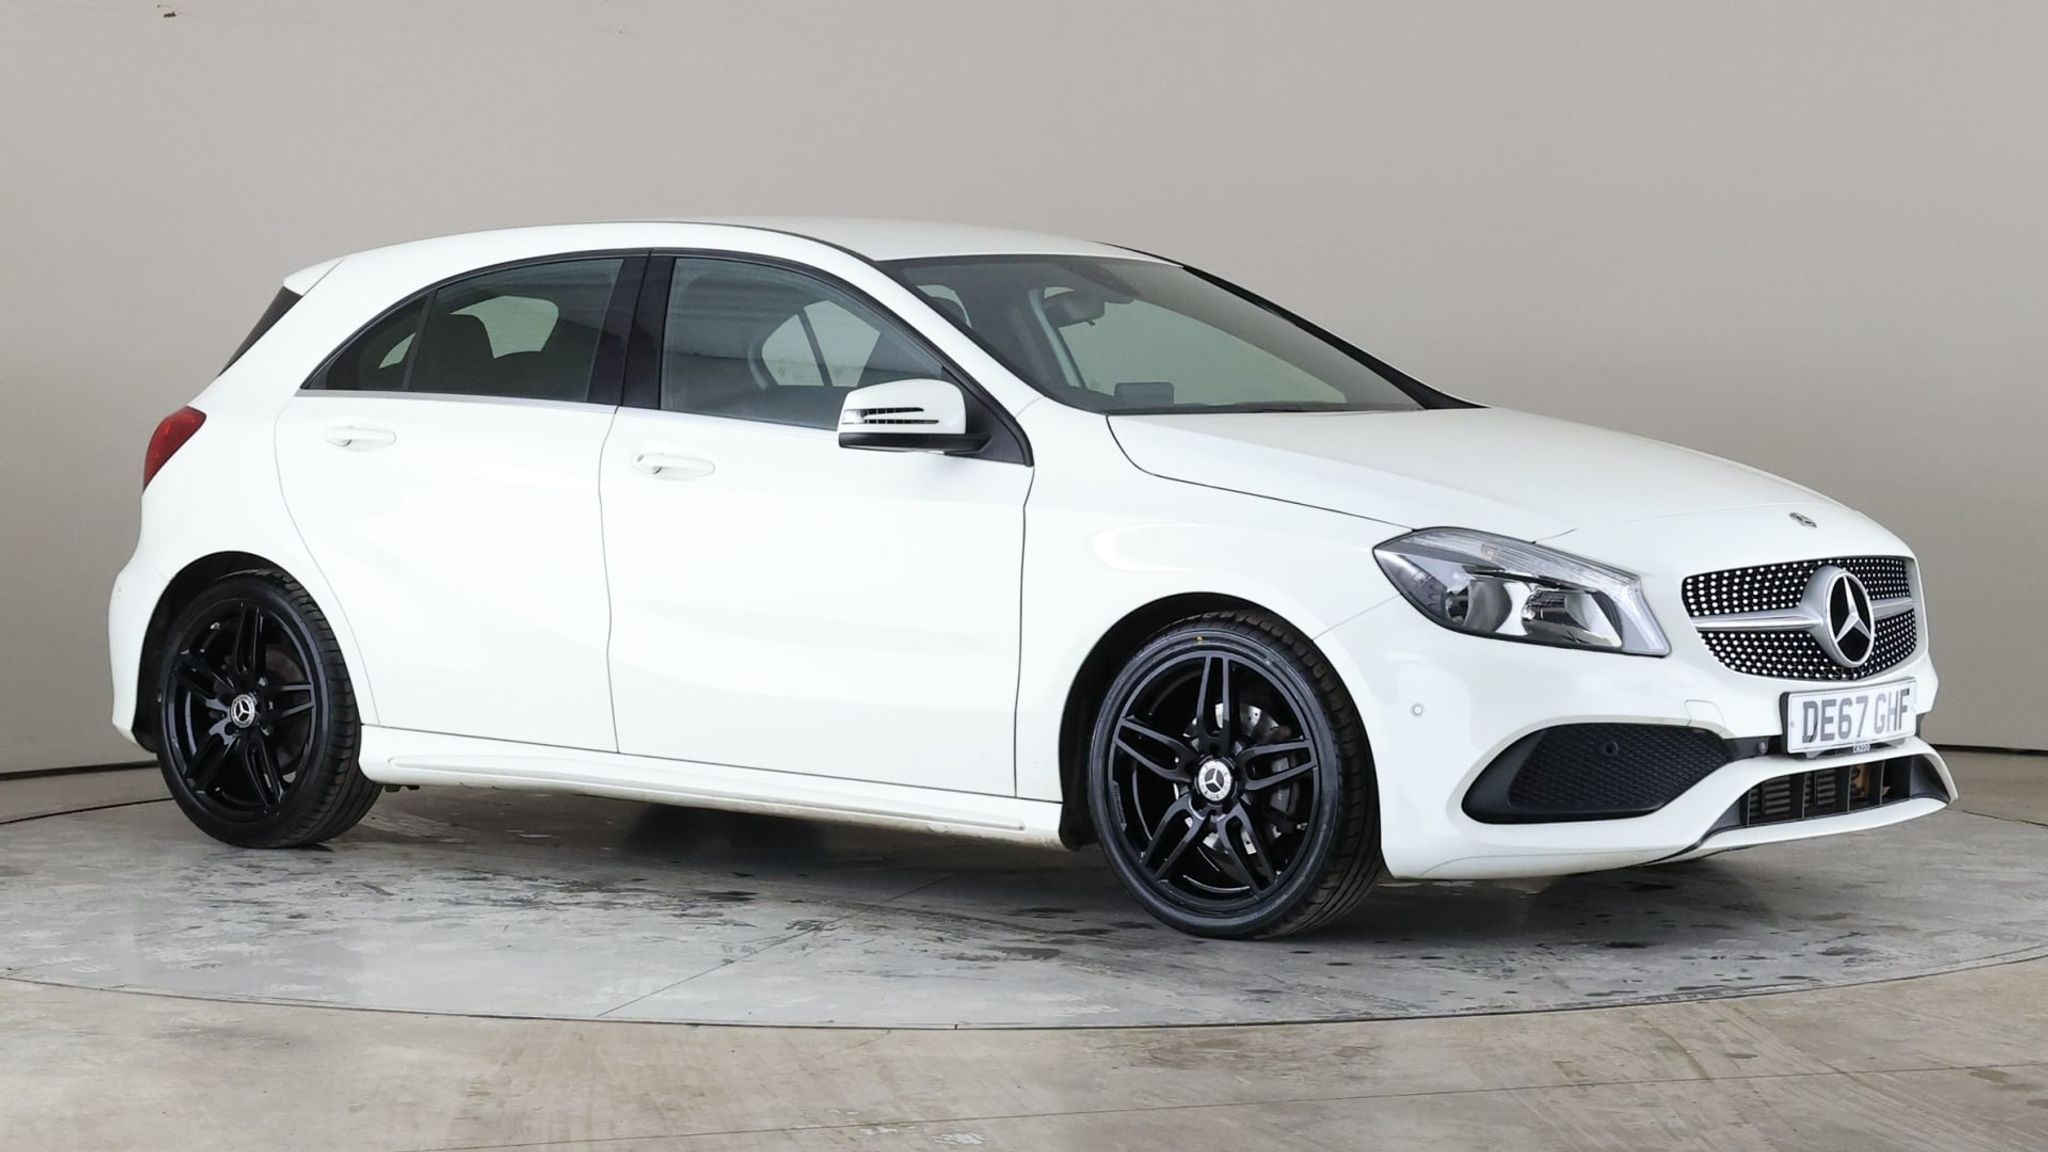 2017 used Mercedes-Benz A Class 1.5 A180d AMG Line (Executive) (109 ps)